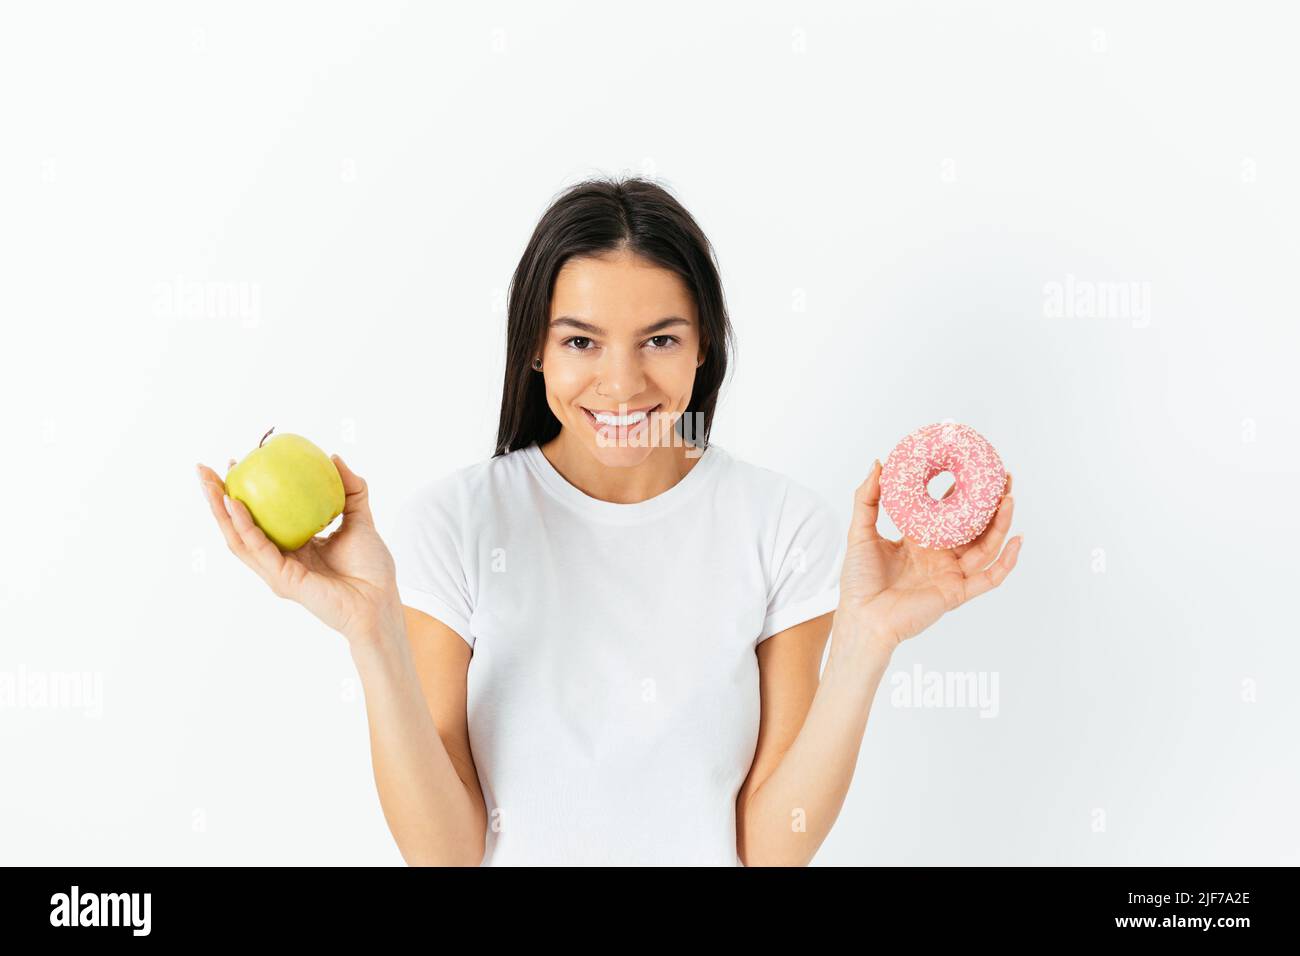 Concept of healthy and unhealthy eating. Happy young woman holding green apple and donut standing against the white studio background Stock Photo